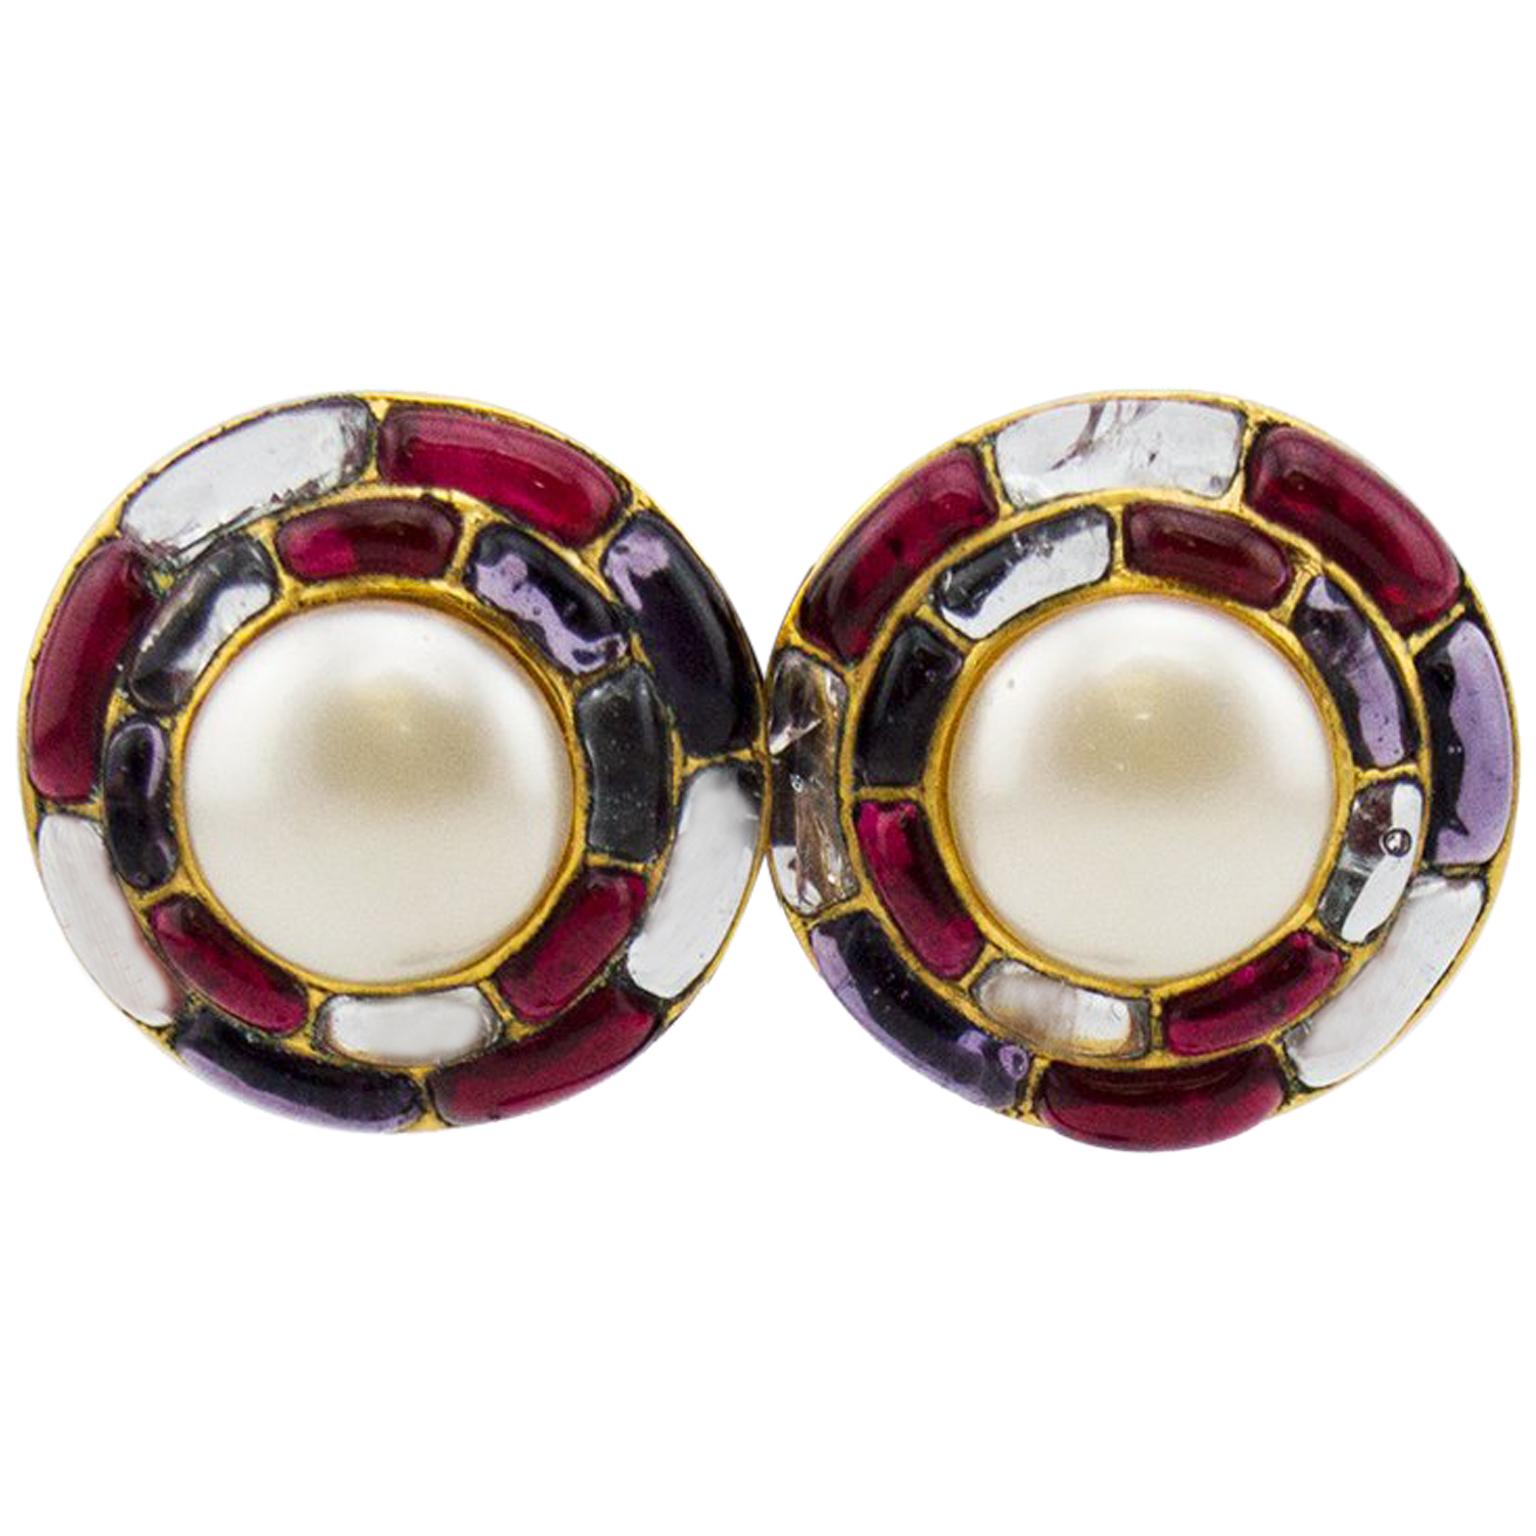 1994 Fall Chanel Poured Glass and Pearl Circle Earrings